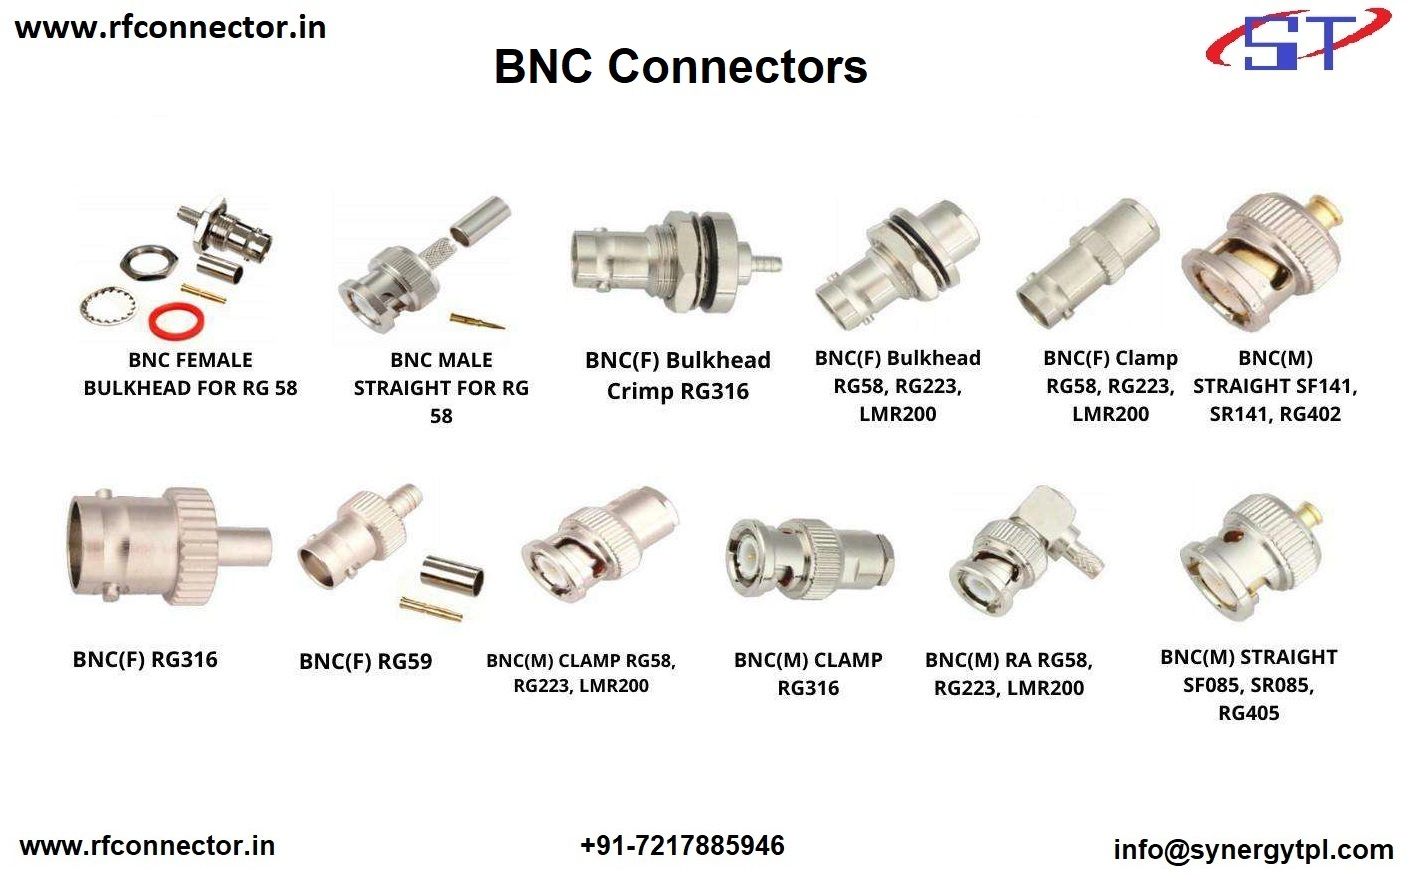 DIN male connector for half inch LDF cable